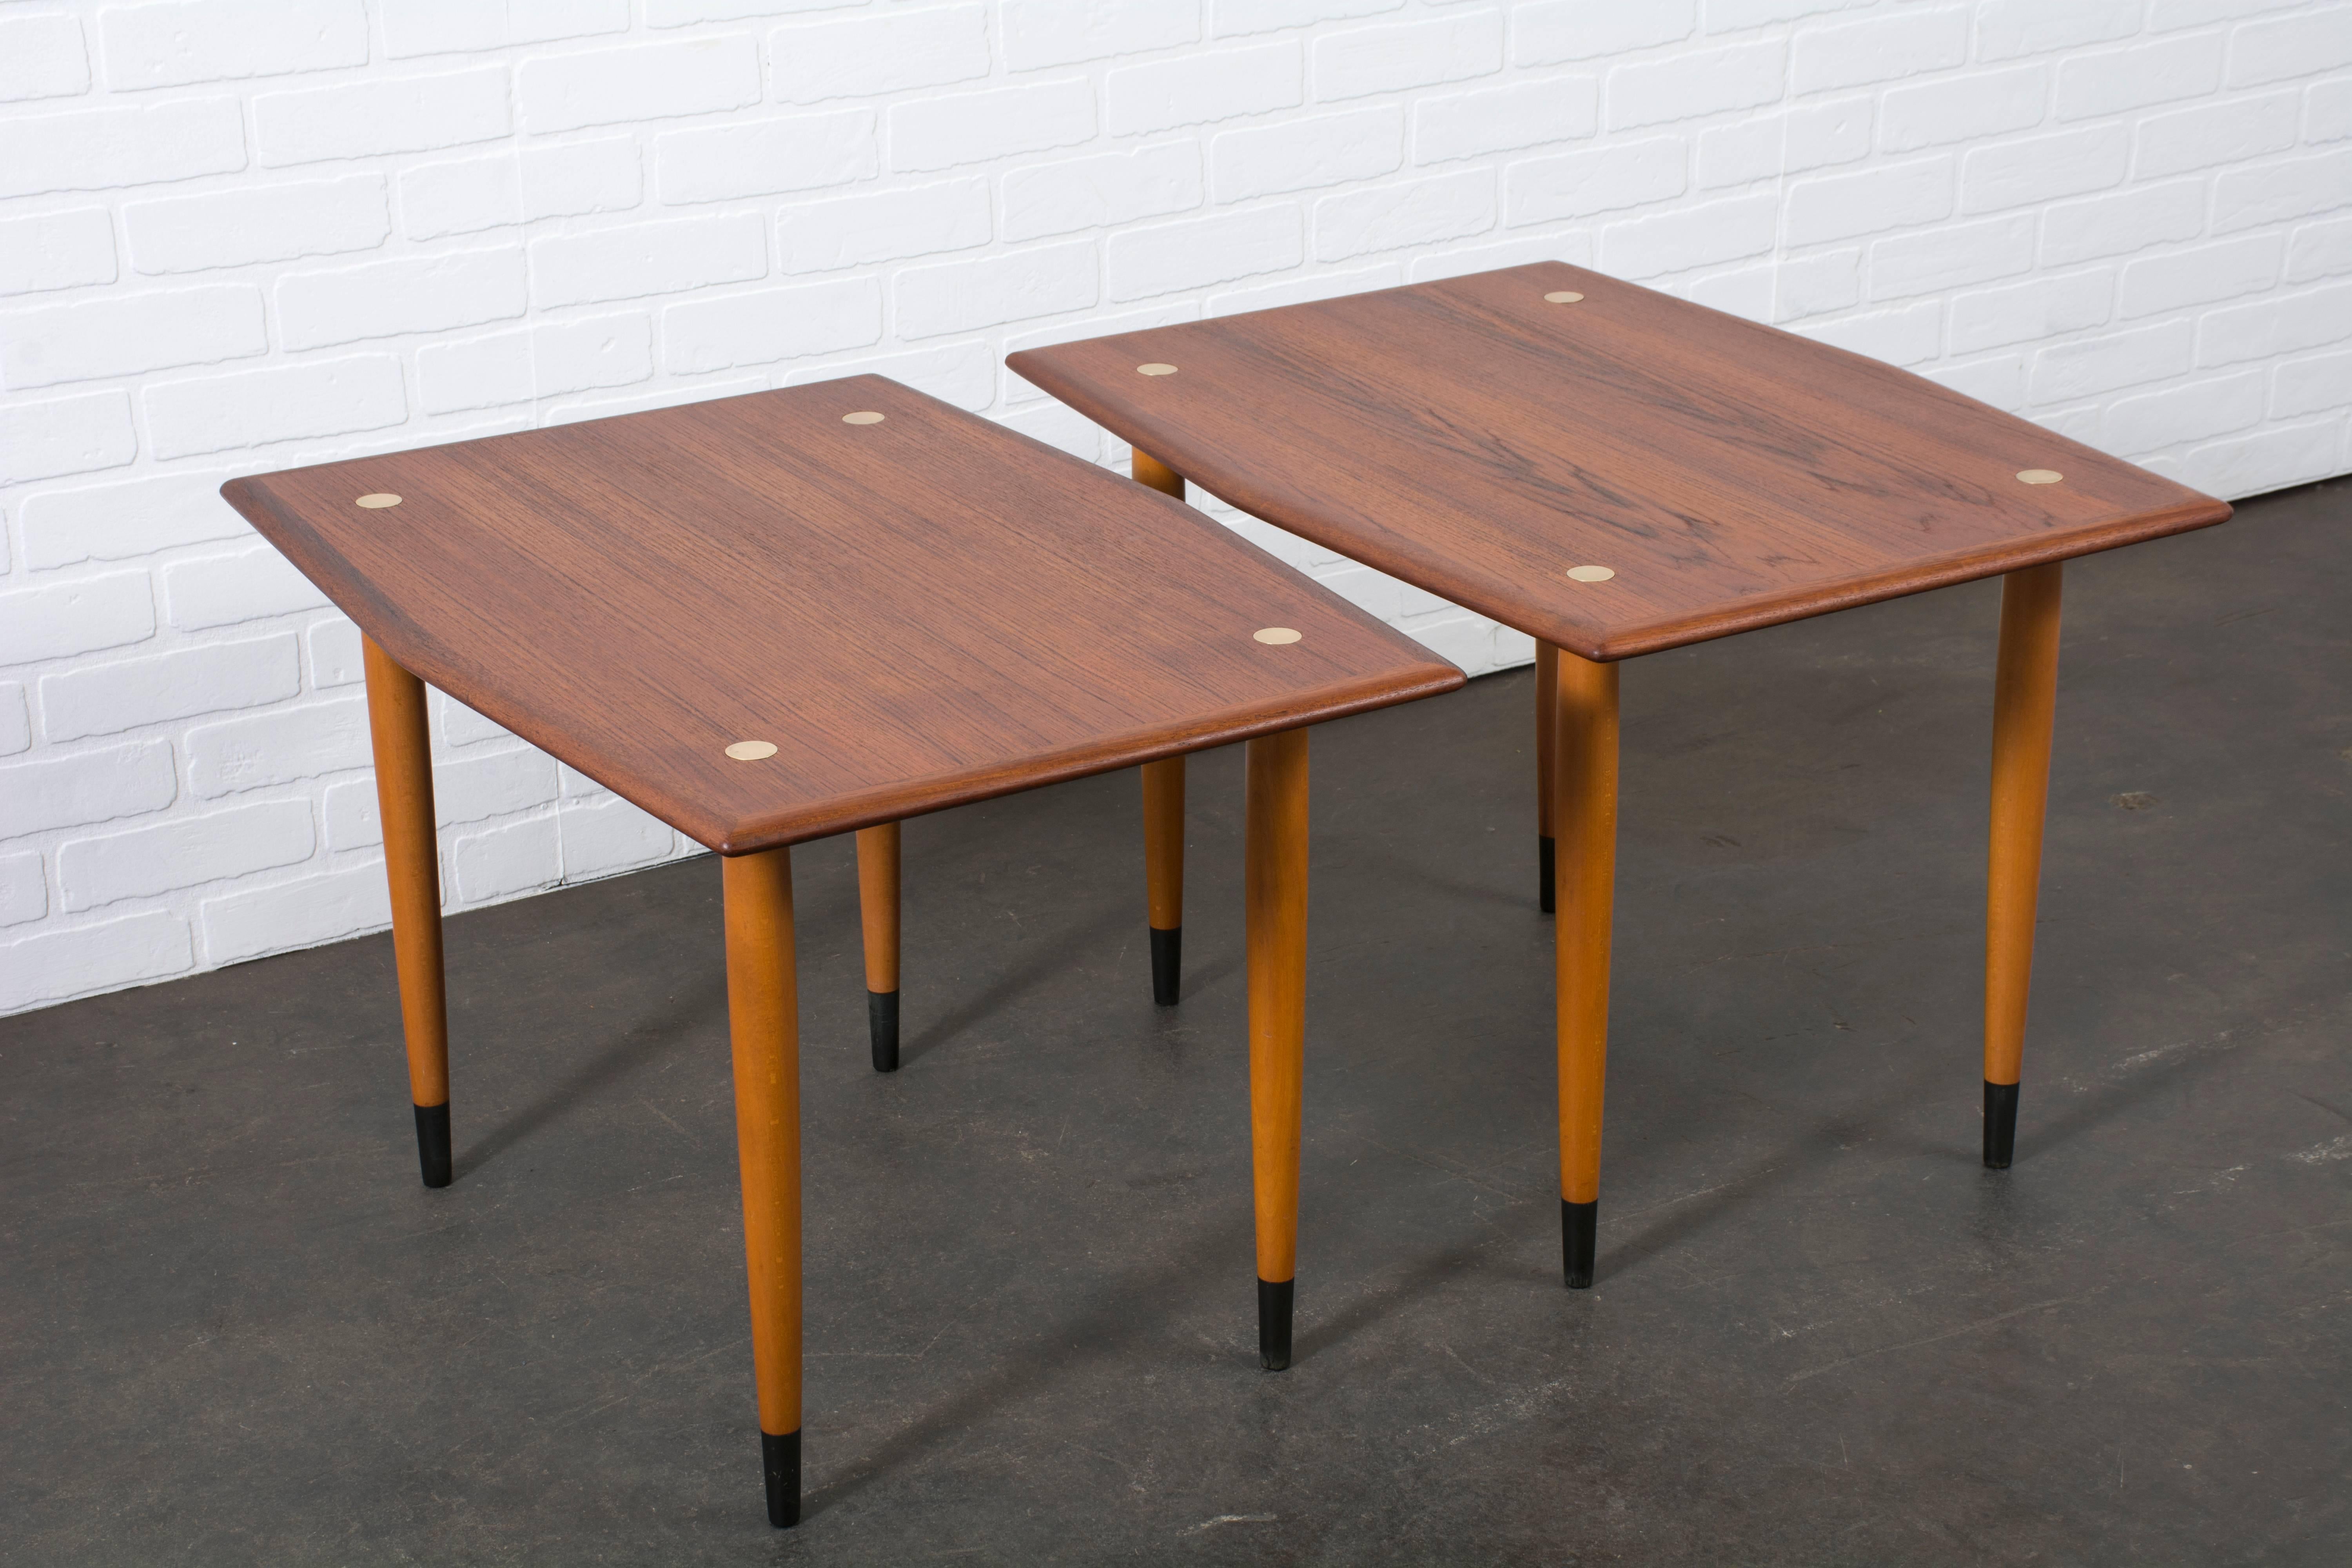 This is a pair of Mid-Century Modern teak and beech end tables by DUX, made in Sweden, circa 1950s. They have circular brass inserts on the teak tops and black ebonized tips on the beech legs.